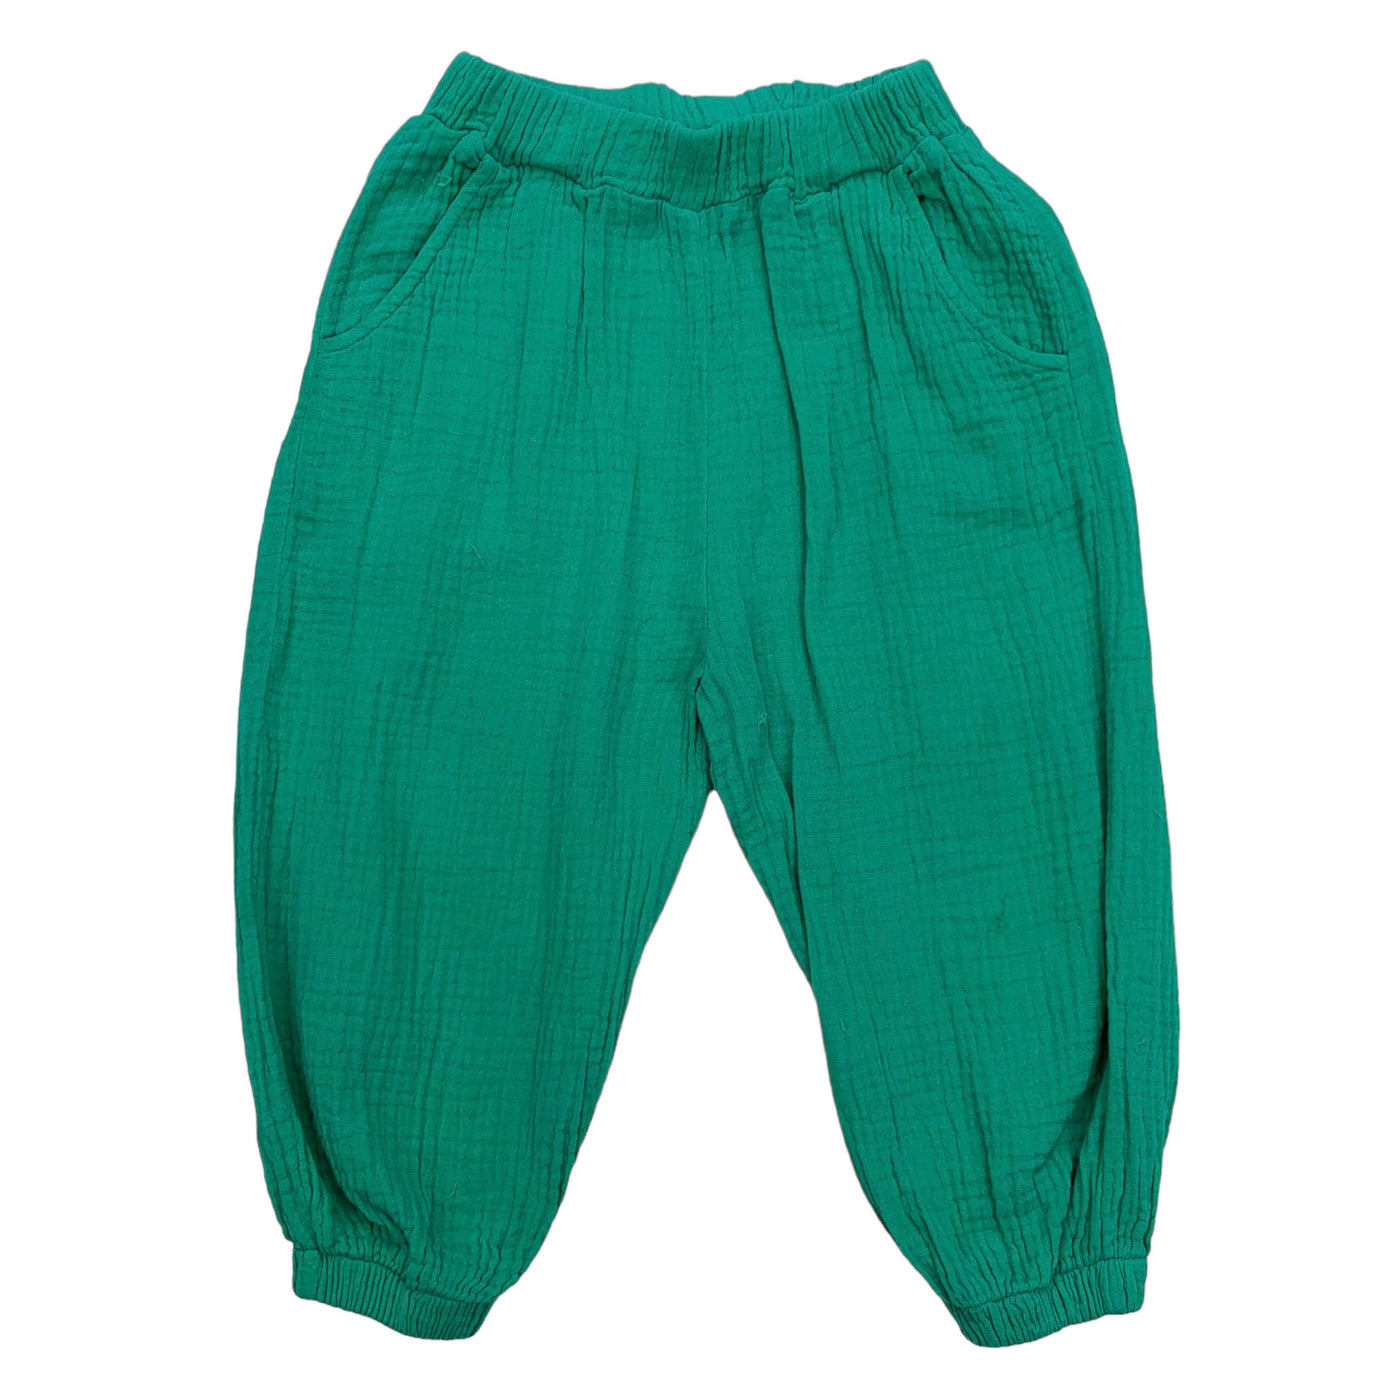 The campamento summer pants double gauze green size 2